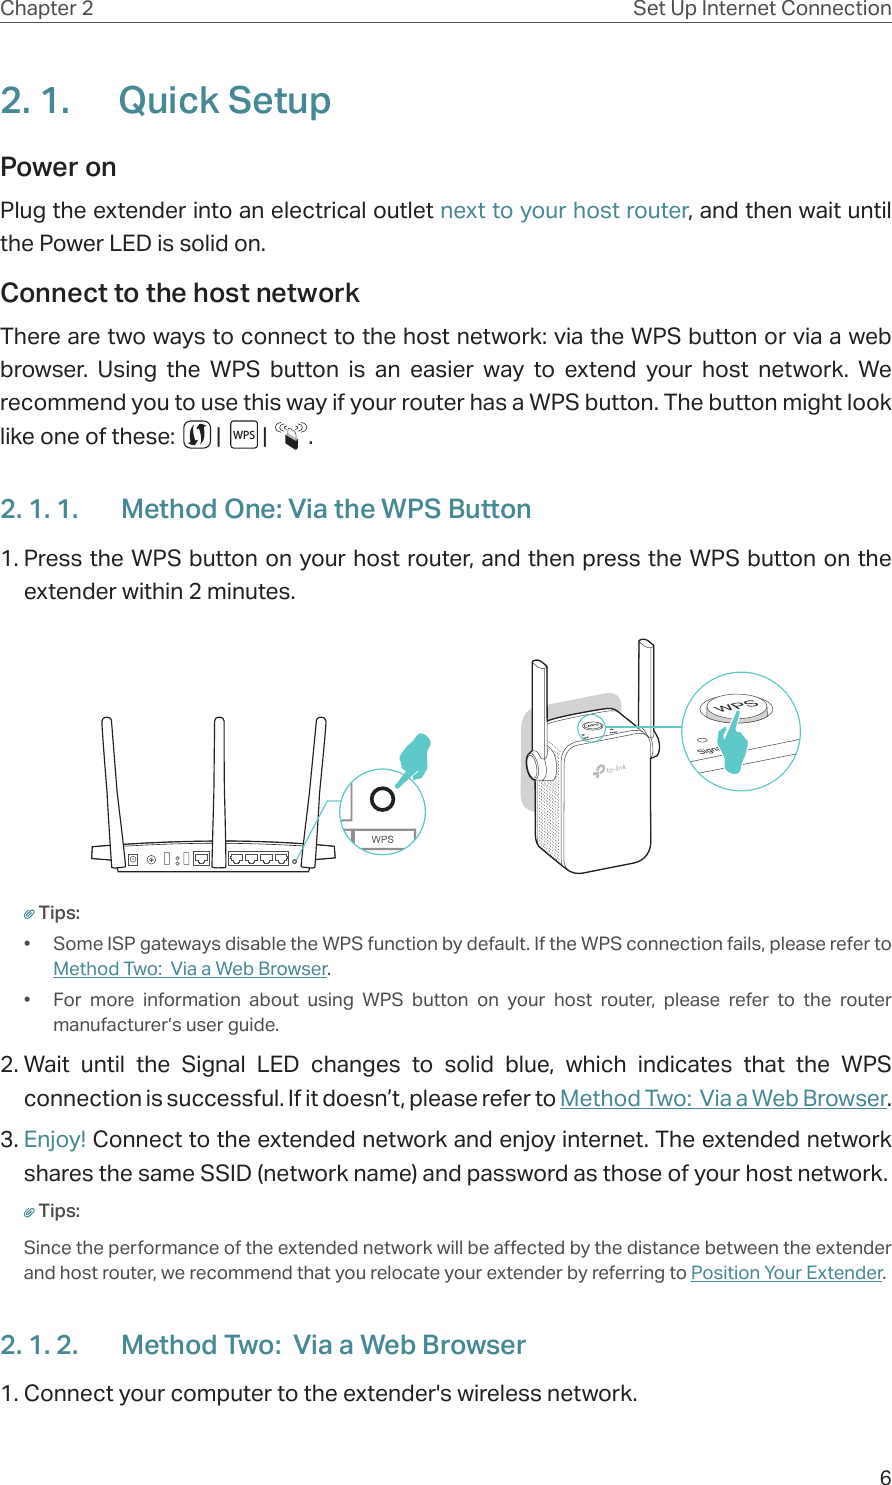 6Chapter 2 Set Up Internet Connection2. 1.  Quick SetupPower on Plug the extender into an electrical outlet next to your host router, and then wait until the Power LED is solid on.Connect to the host network There are two ways to connect to the host network: via the WPS button or via a web browser. Using the WPS button is an easier way to extend your host network. We recommend you to use this way if your router has a WPS button. The button might look like one of these:        |        |        .2. 1. 1.  Method One: Via the WPS Button1. Press the WPS button on your host router, and then press the WPS button on the extender within 2 minutes.Tips:•  Some ISP gateways disable the WPS function by default. If the WPS connection fails, please refer to Method Two:  Via a Web Browser.•  For more information about using WPS button on your host router, please refer to the router manufacturer’s user guide.2. Wait until the Signal LED changes to solid blue, which indicates that the WPS connection is successful. If it doesn’t, please refer to Method Two:  Via a Web Browser. 3. Enjoy! Connect to the extended network and enjoy internet. The extended network shares the same SSID (network name) and password as those of your host network.Tips:Since the performance of the extended network will be affected by the distance between the extender and host router, we recommend that you relocate your extender by referring to Position Your Extender.2. 1. 2.  Method Two:  Via a Web Browser1. Connect your computer to the extender&apos;s wireless network.WPS